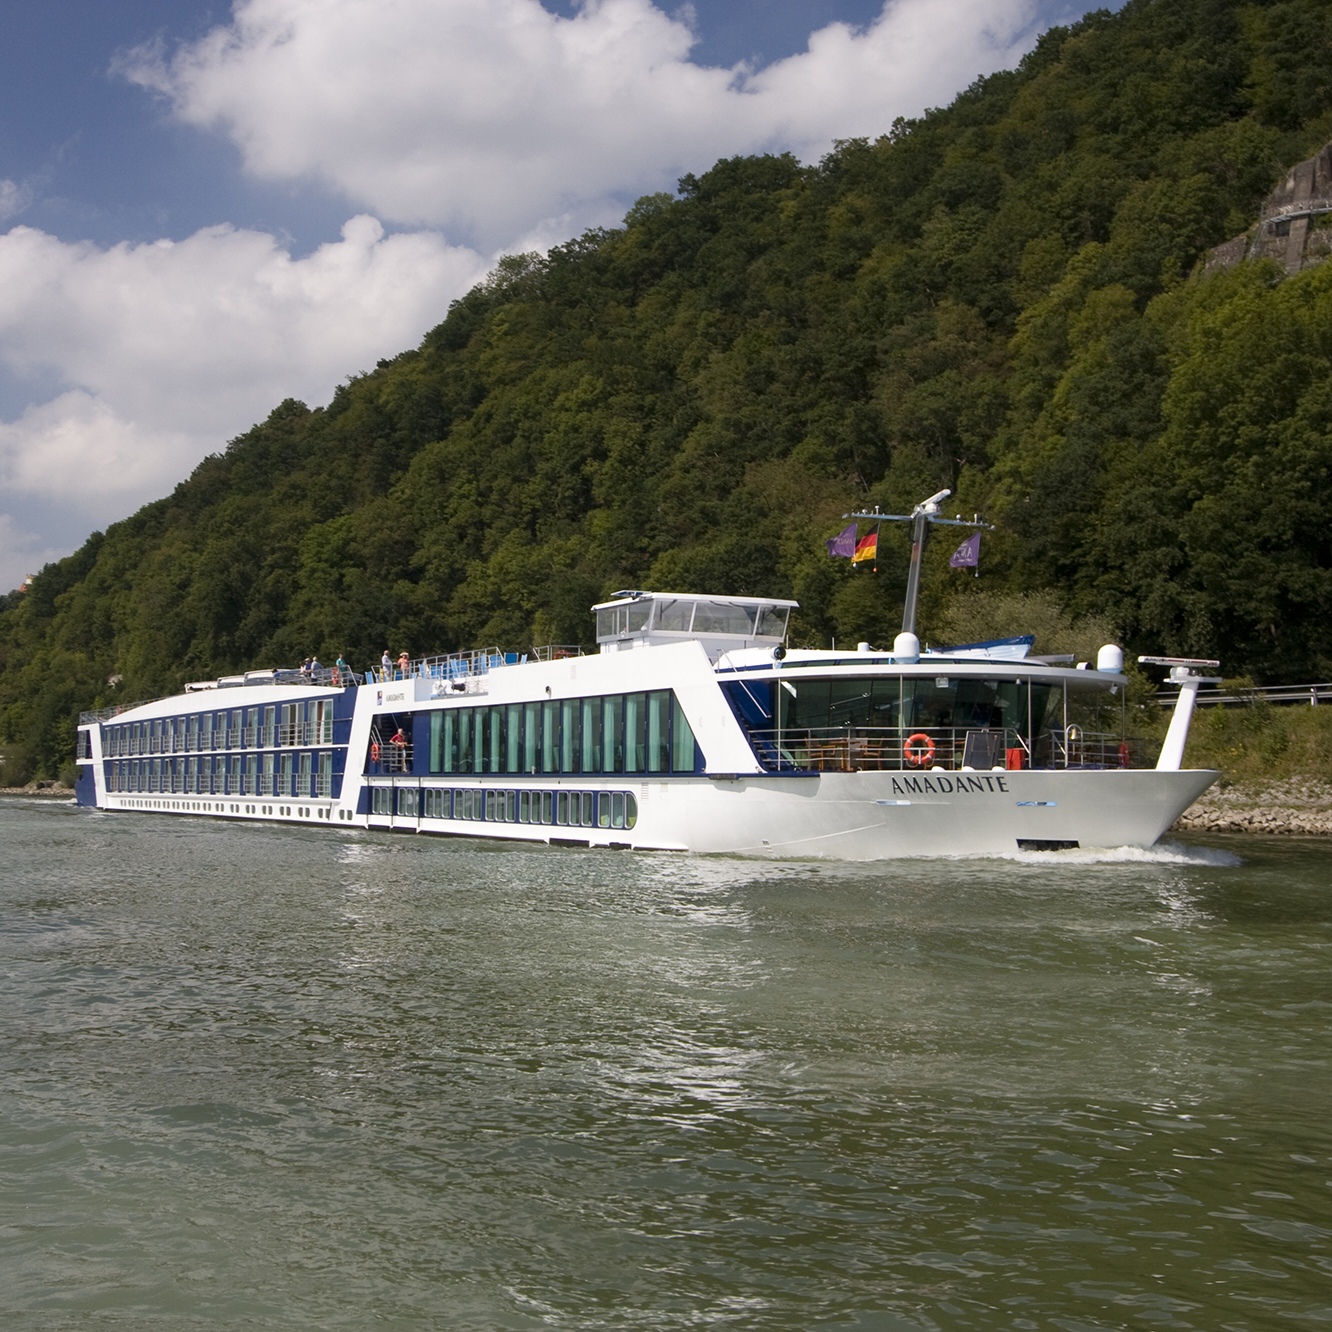 AmaWaterways cancels all of its Europe river cruises CRUISE TO TRAVEL